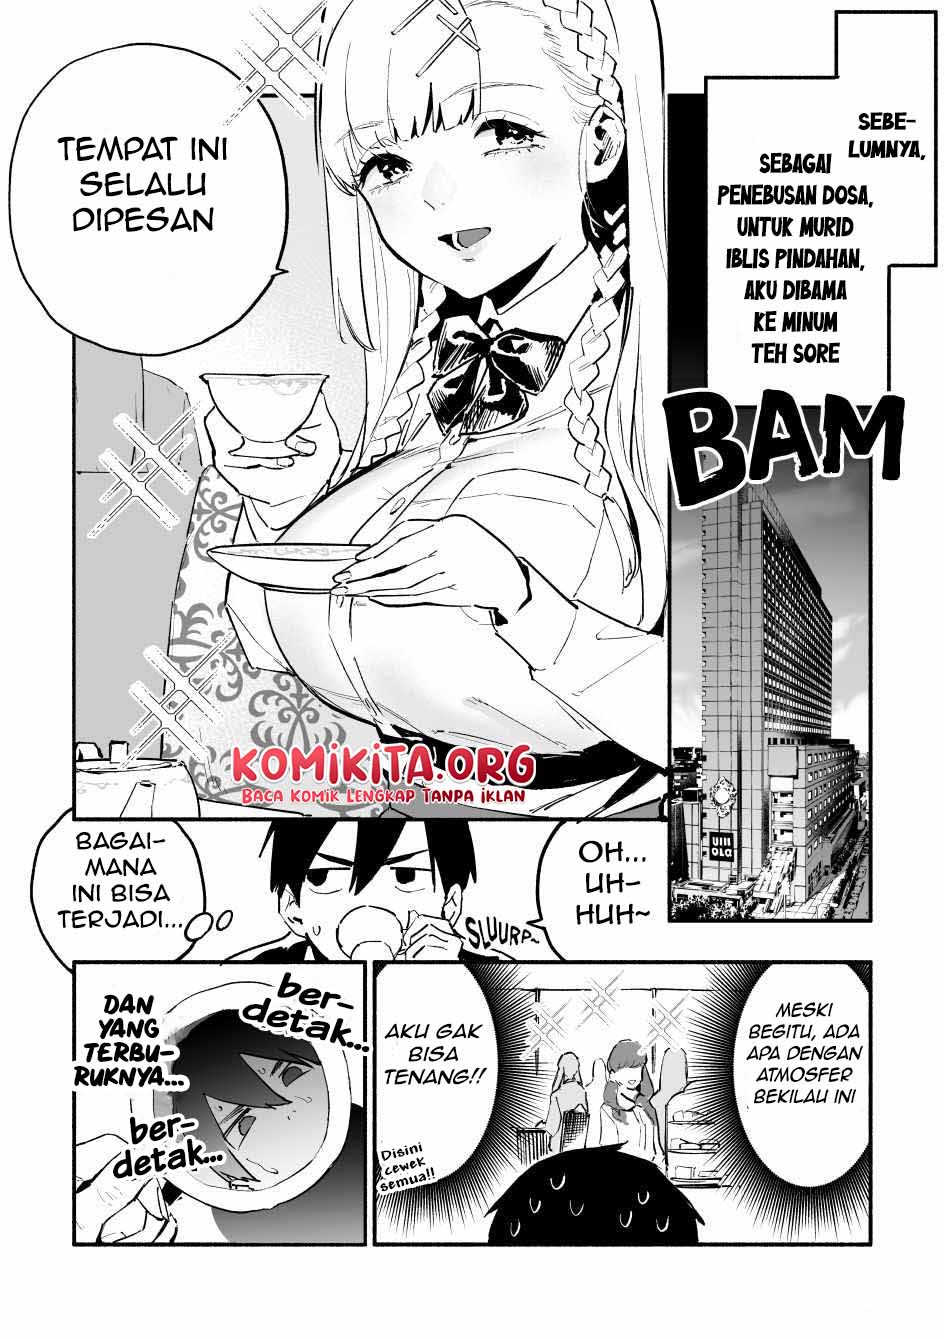 The Angelic Transfer Student and Mastophobia-kun Chapter 07